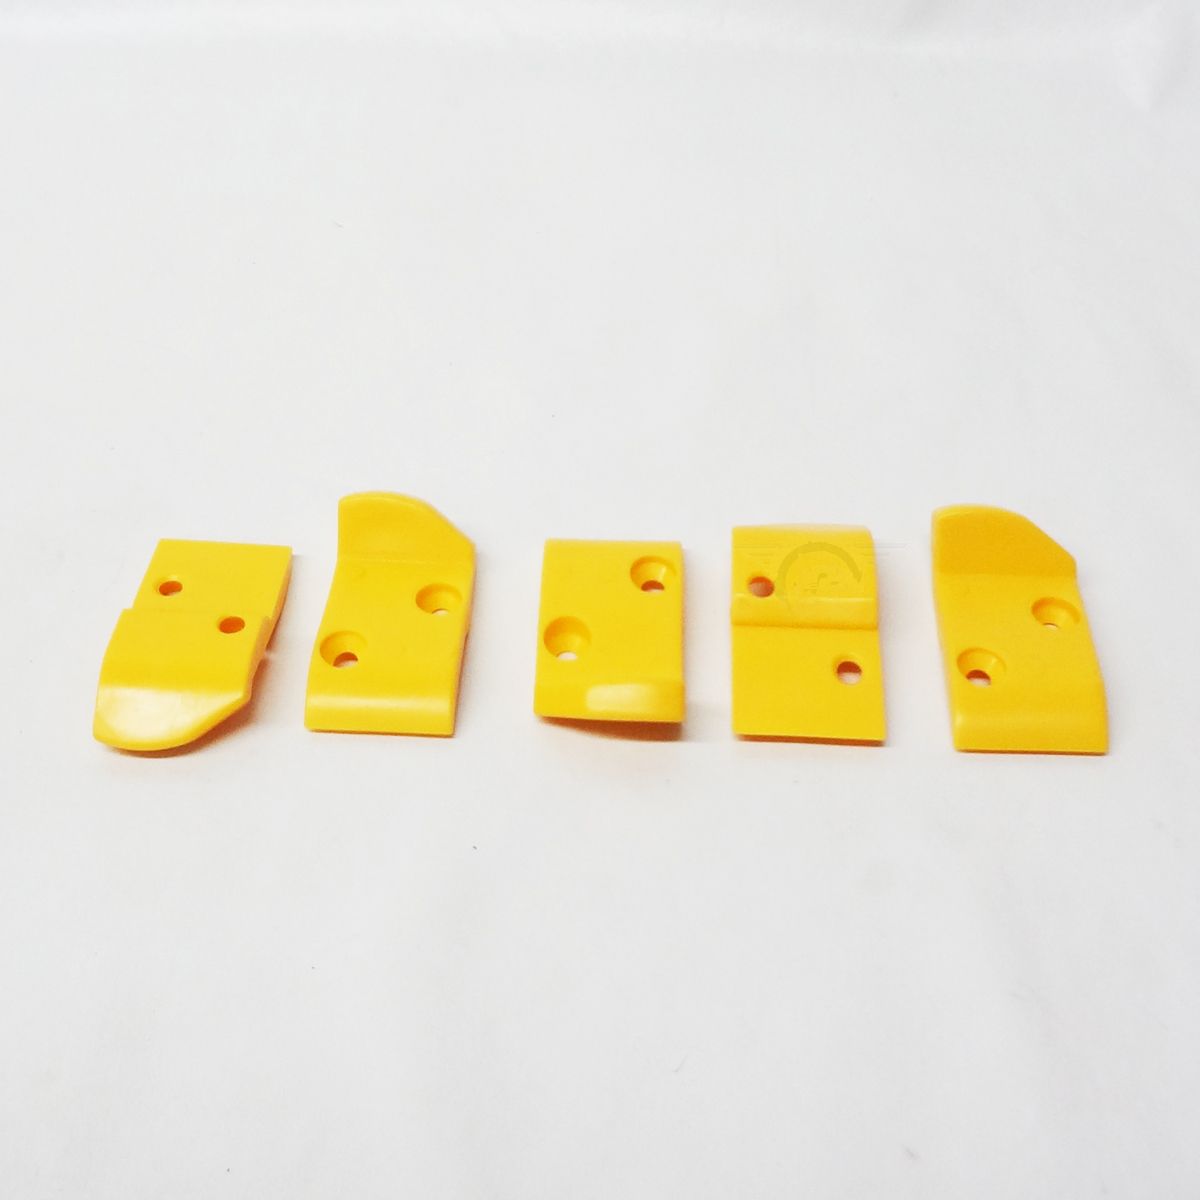 CORGHI Tire Changer Leverless Mount Head Inserts Plastic Protectors Yellow Guard 